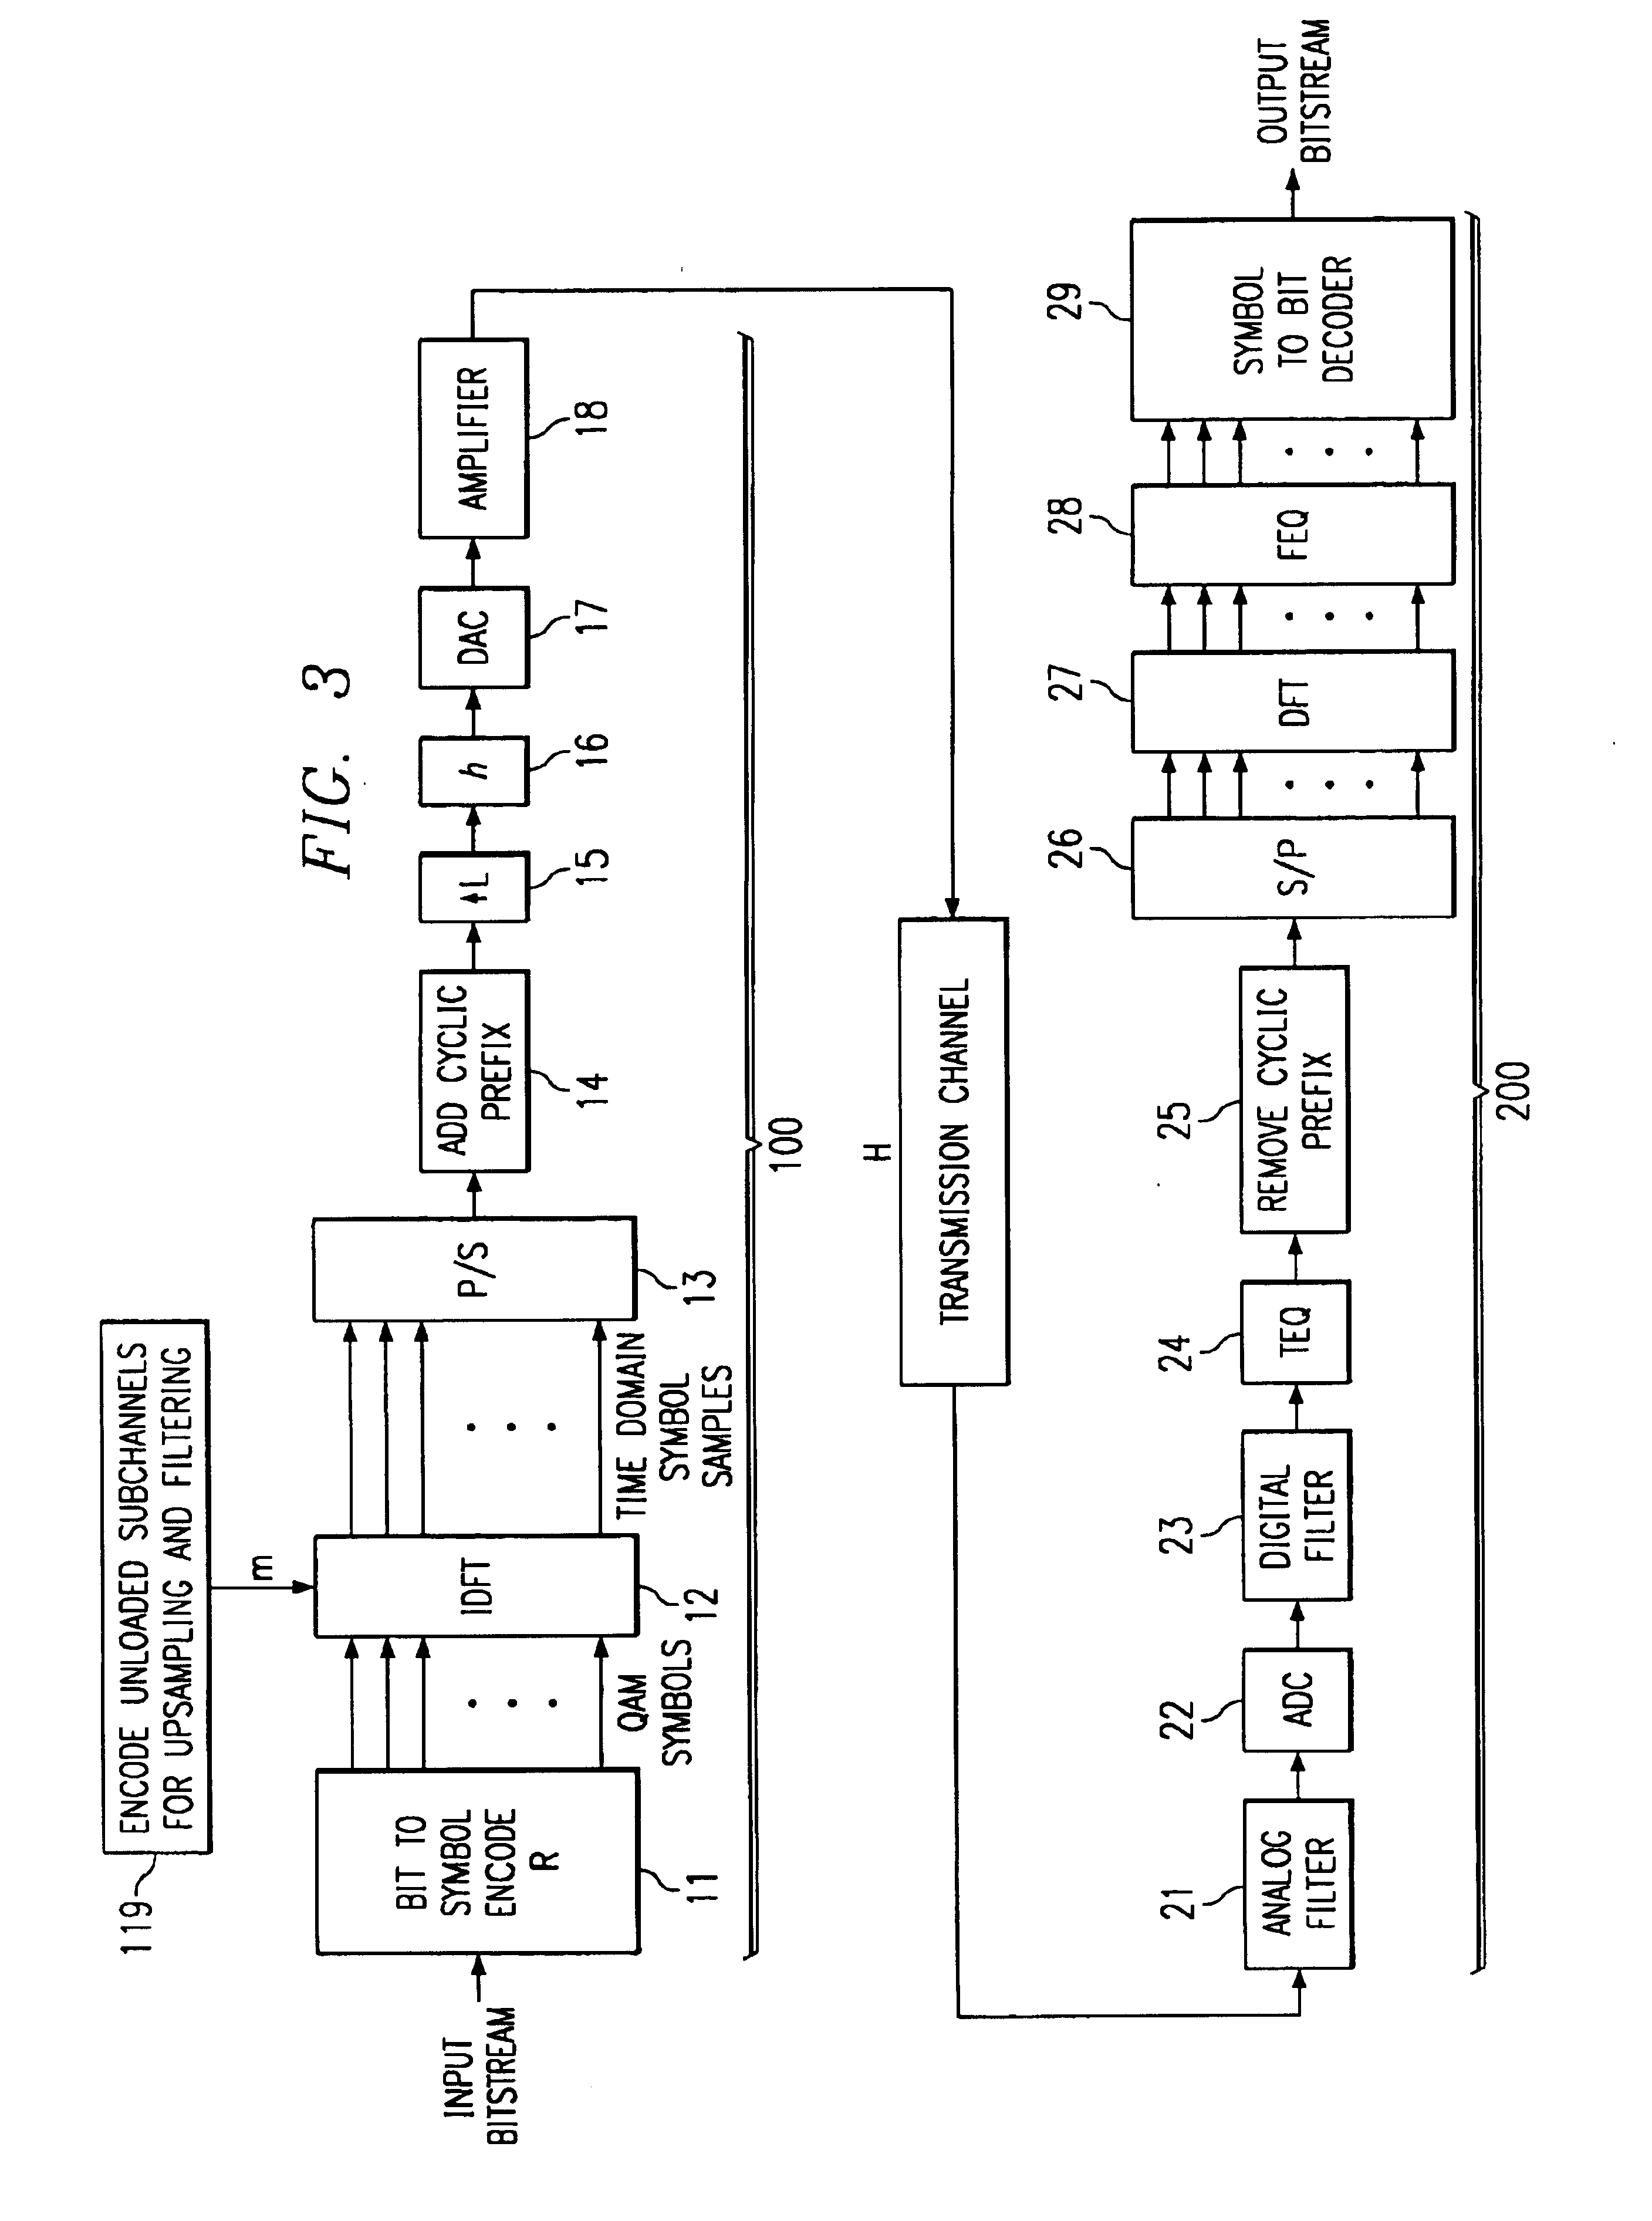 Discrete multitone modulation with reduced peak-to-average ratio using unloaded subchannels